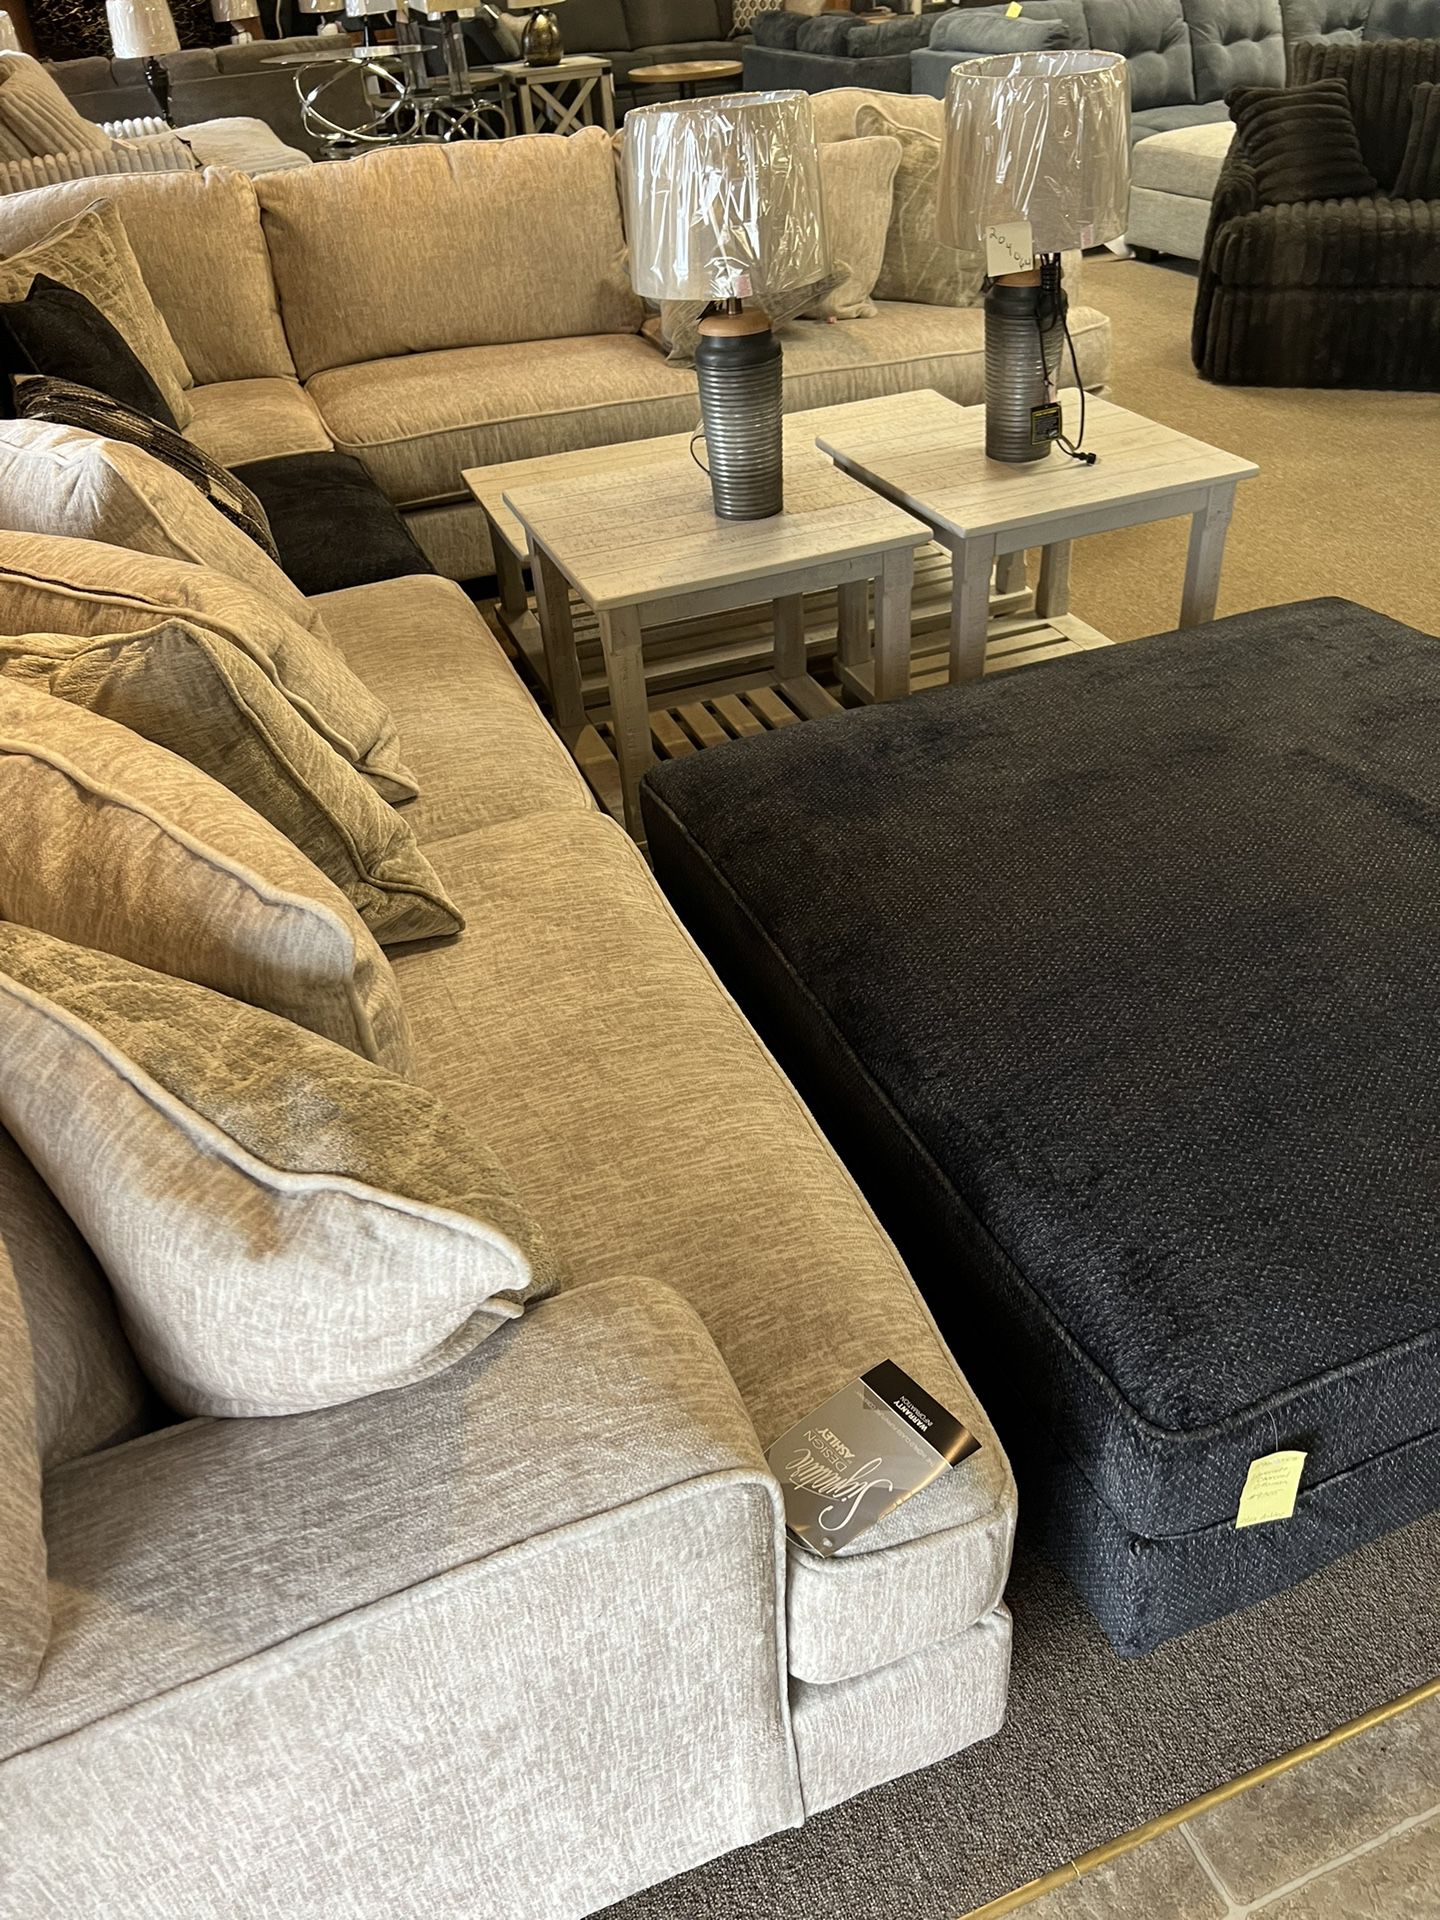 Absolutely Gorgeous Deep Cushion Cozy Sectional!